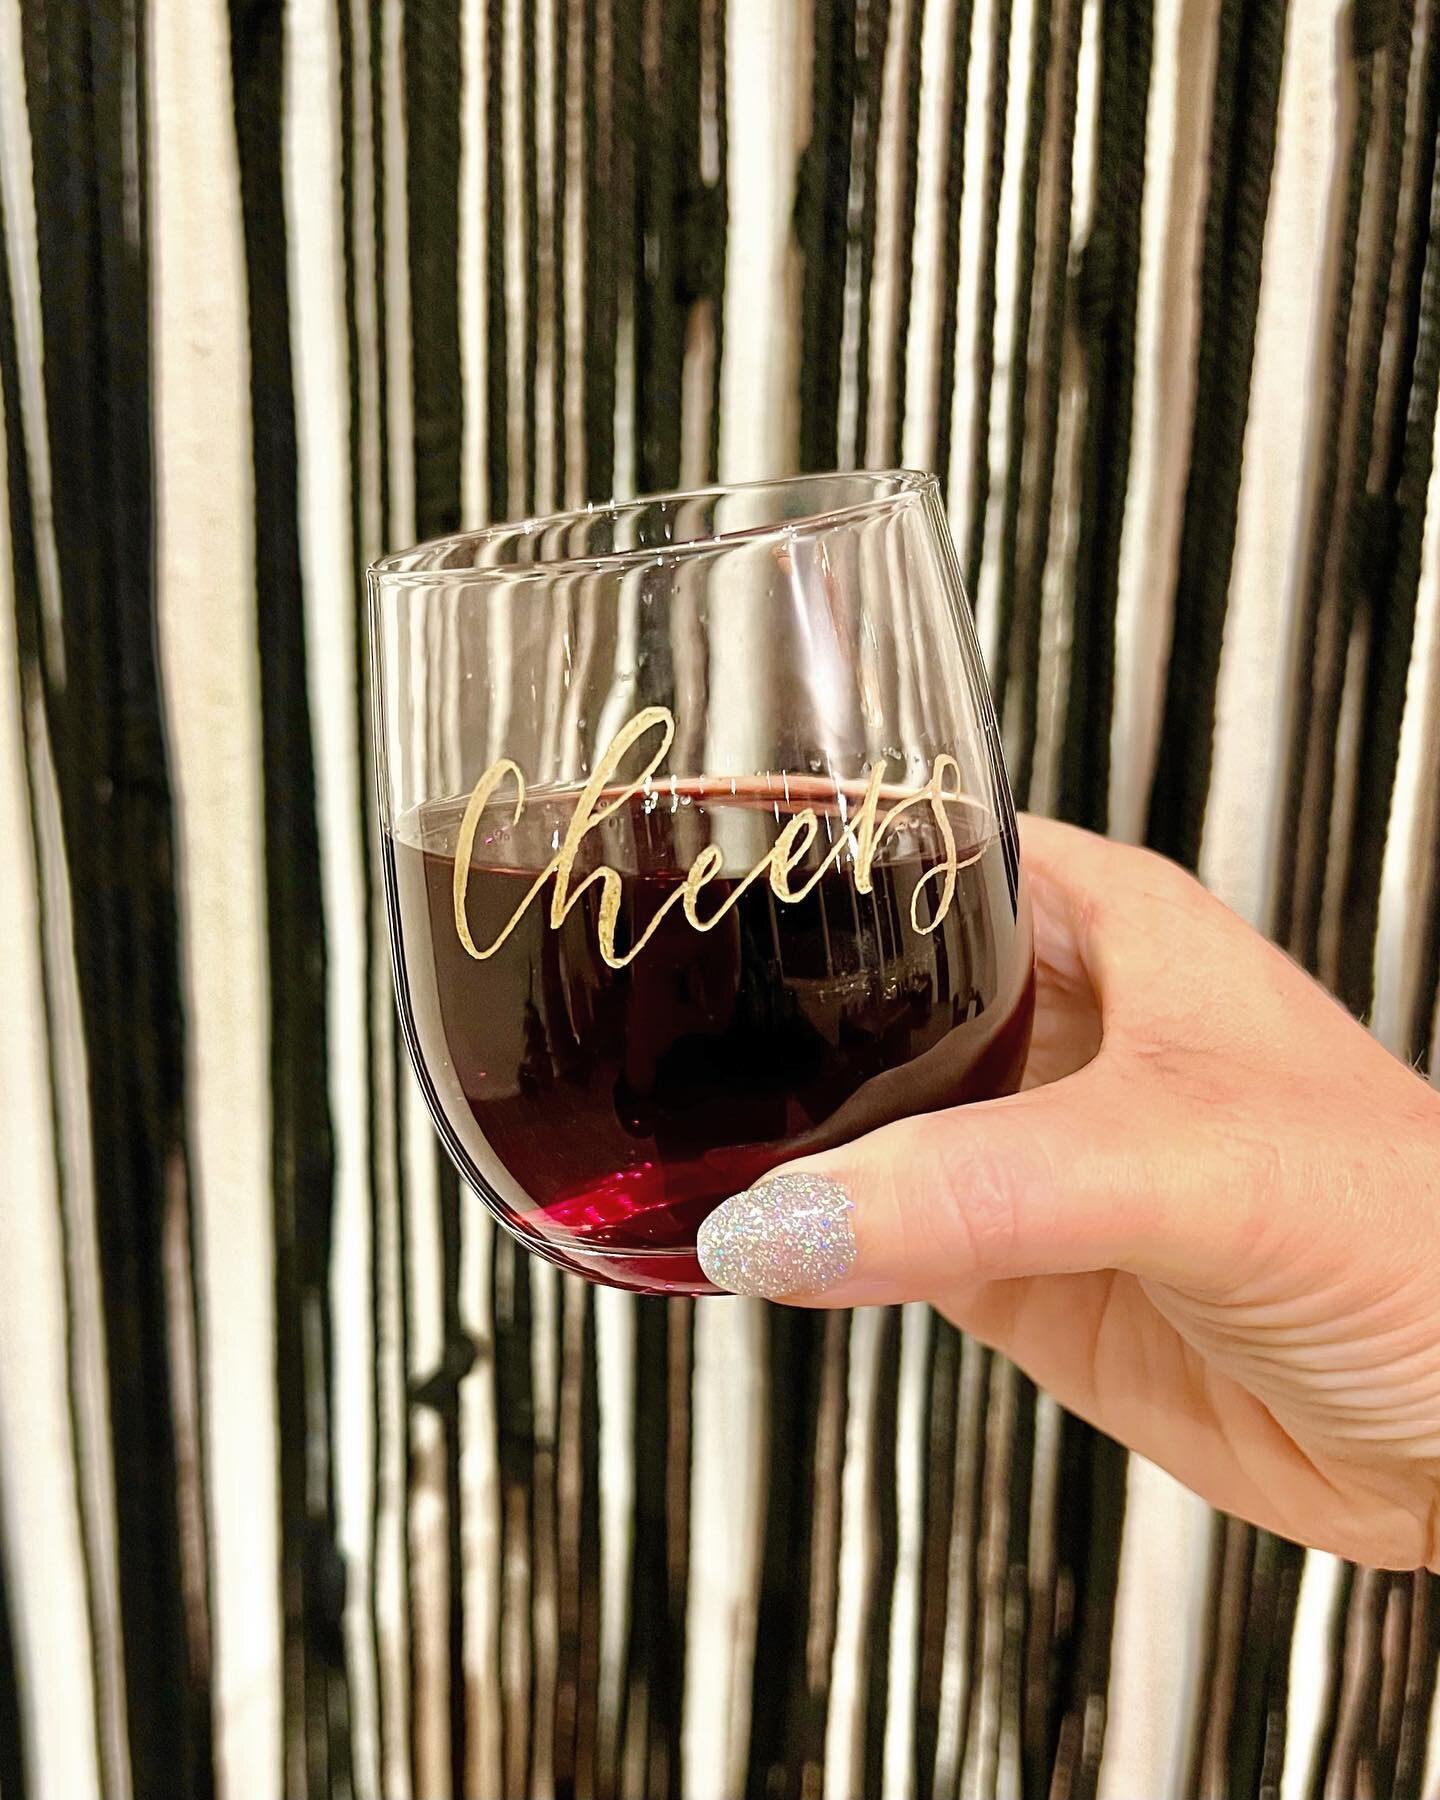 Cheers to Friday! I hope you have a great weekend filled with rest and enjoyment. 
#engraving #engraved #engravedgifts #engravedwineglass